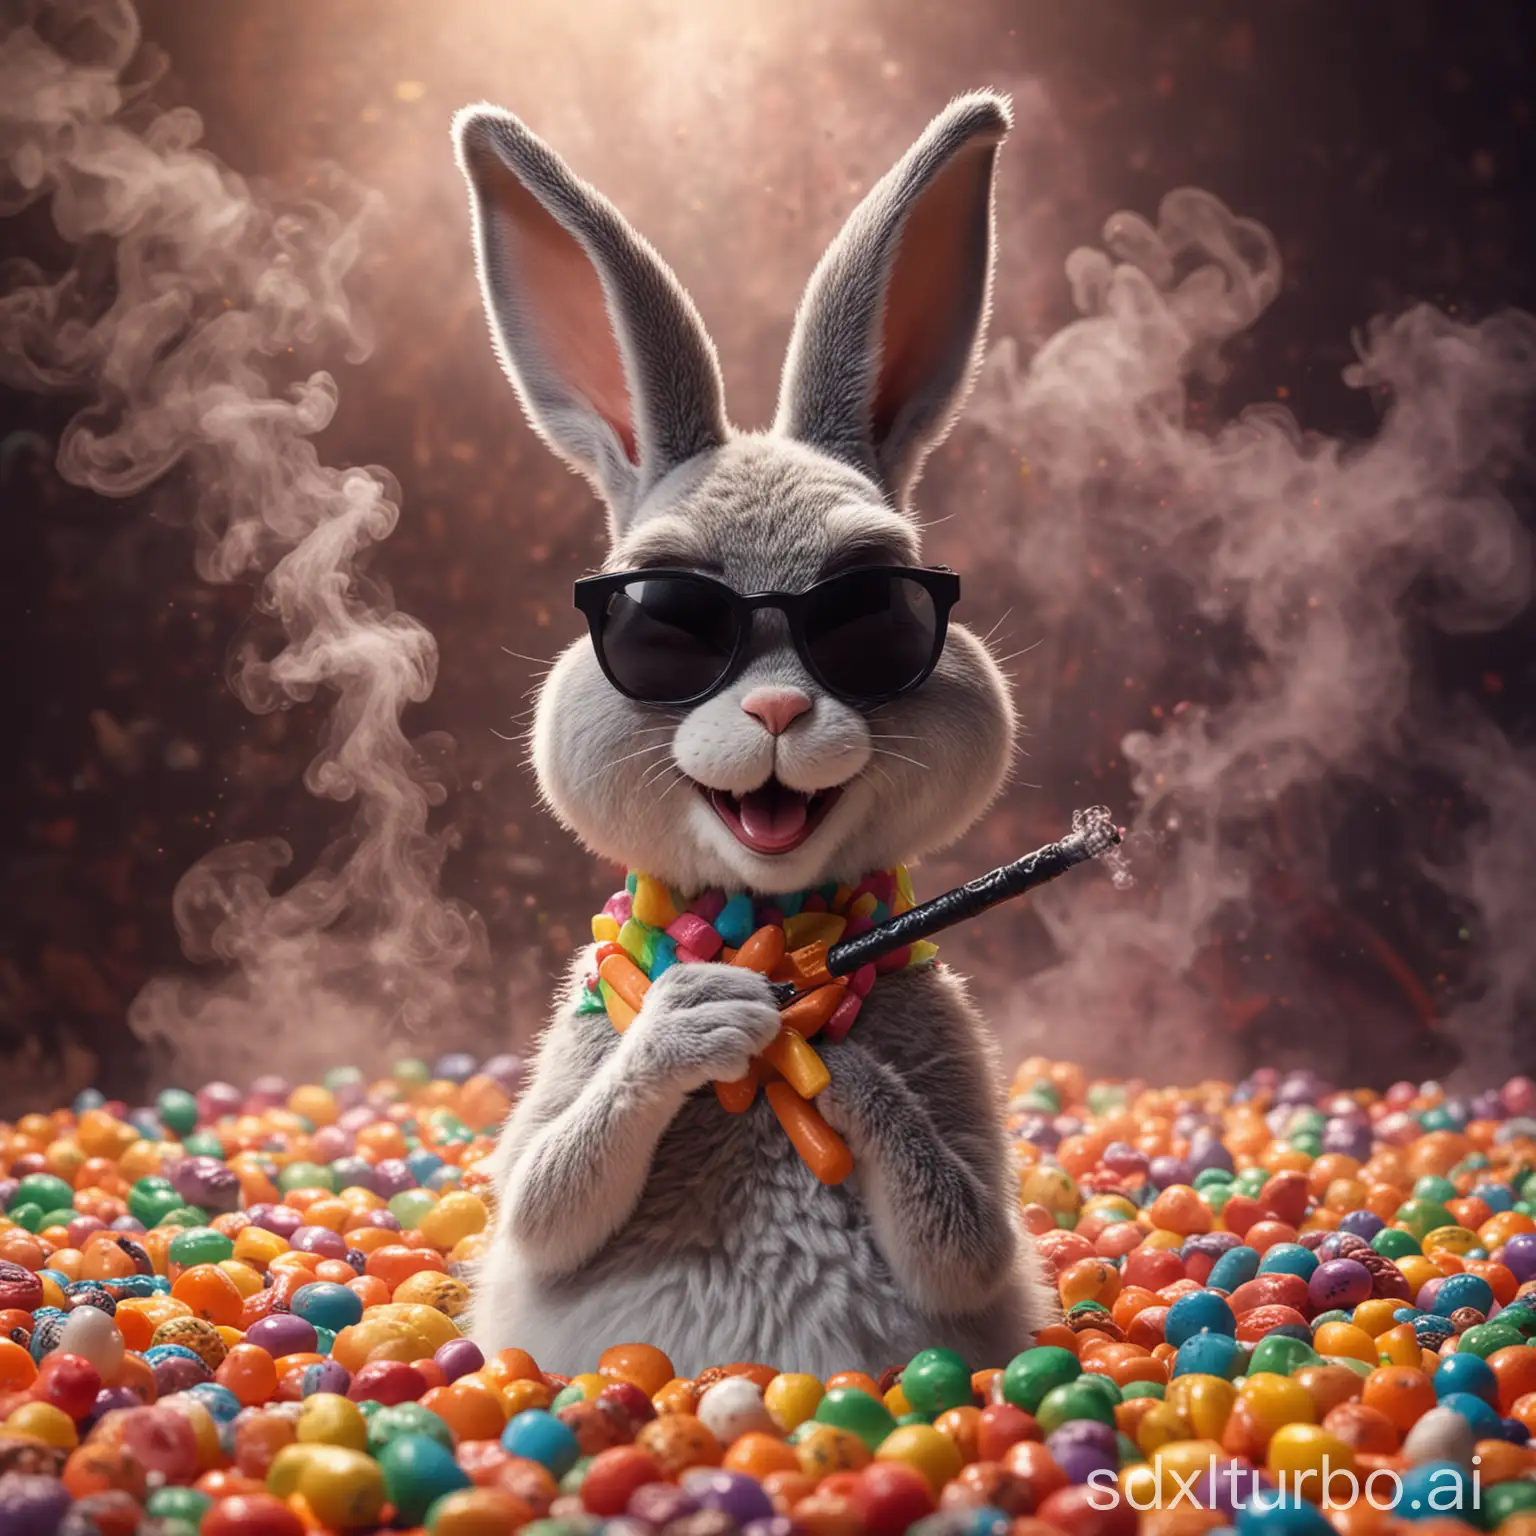 young smiling happy cute bugs bunny in black sunglasses vaping. At the background lots of candies and vaping smoke, psychedelic vibe